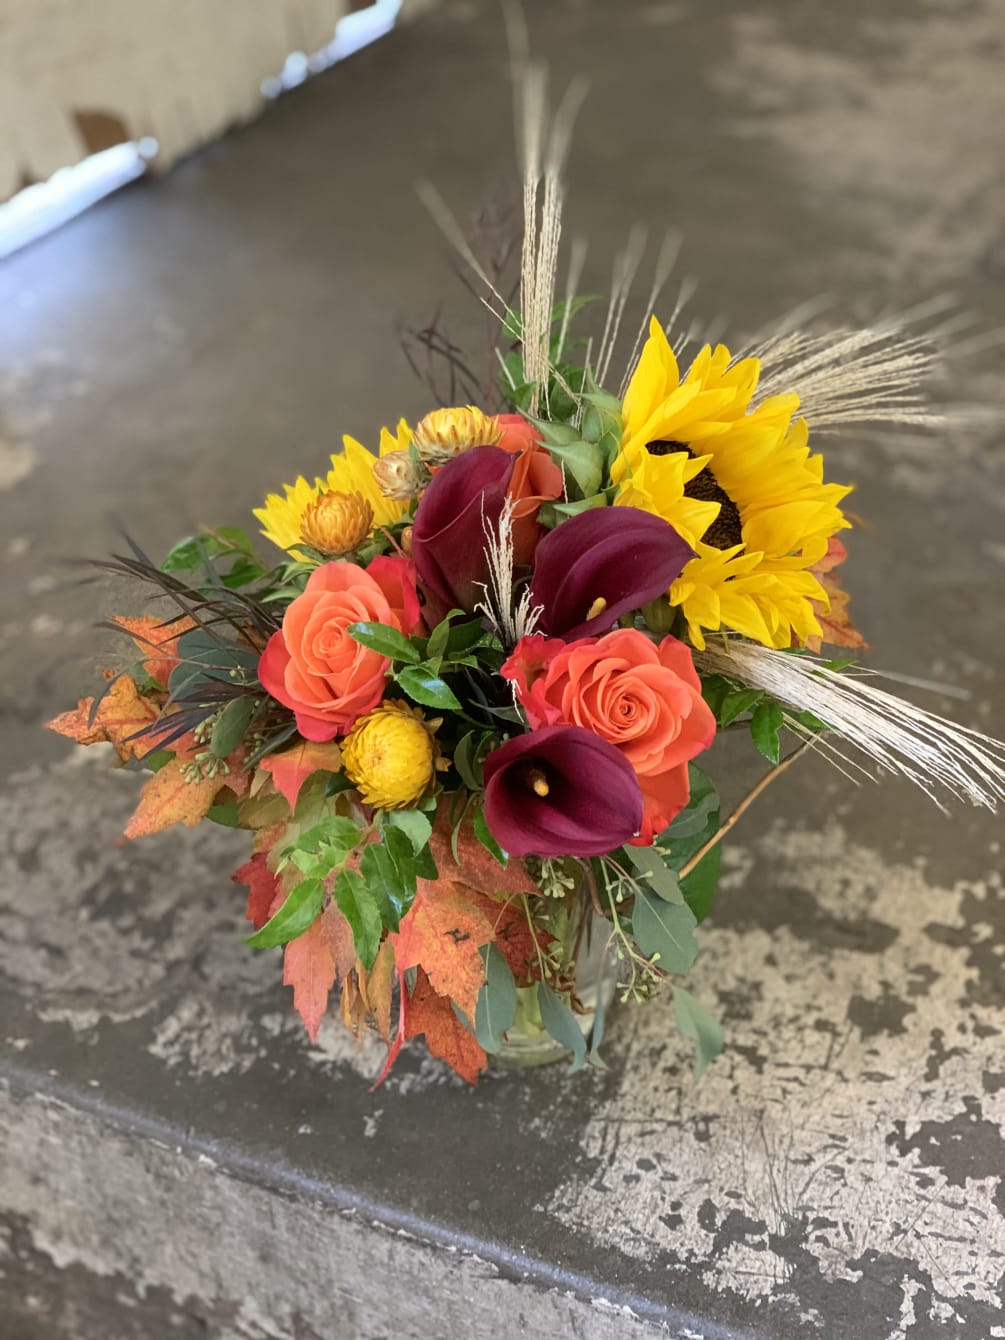 Stunning mix of fall and harvest blooms, perfect for this beautiful season!!

pictured: